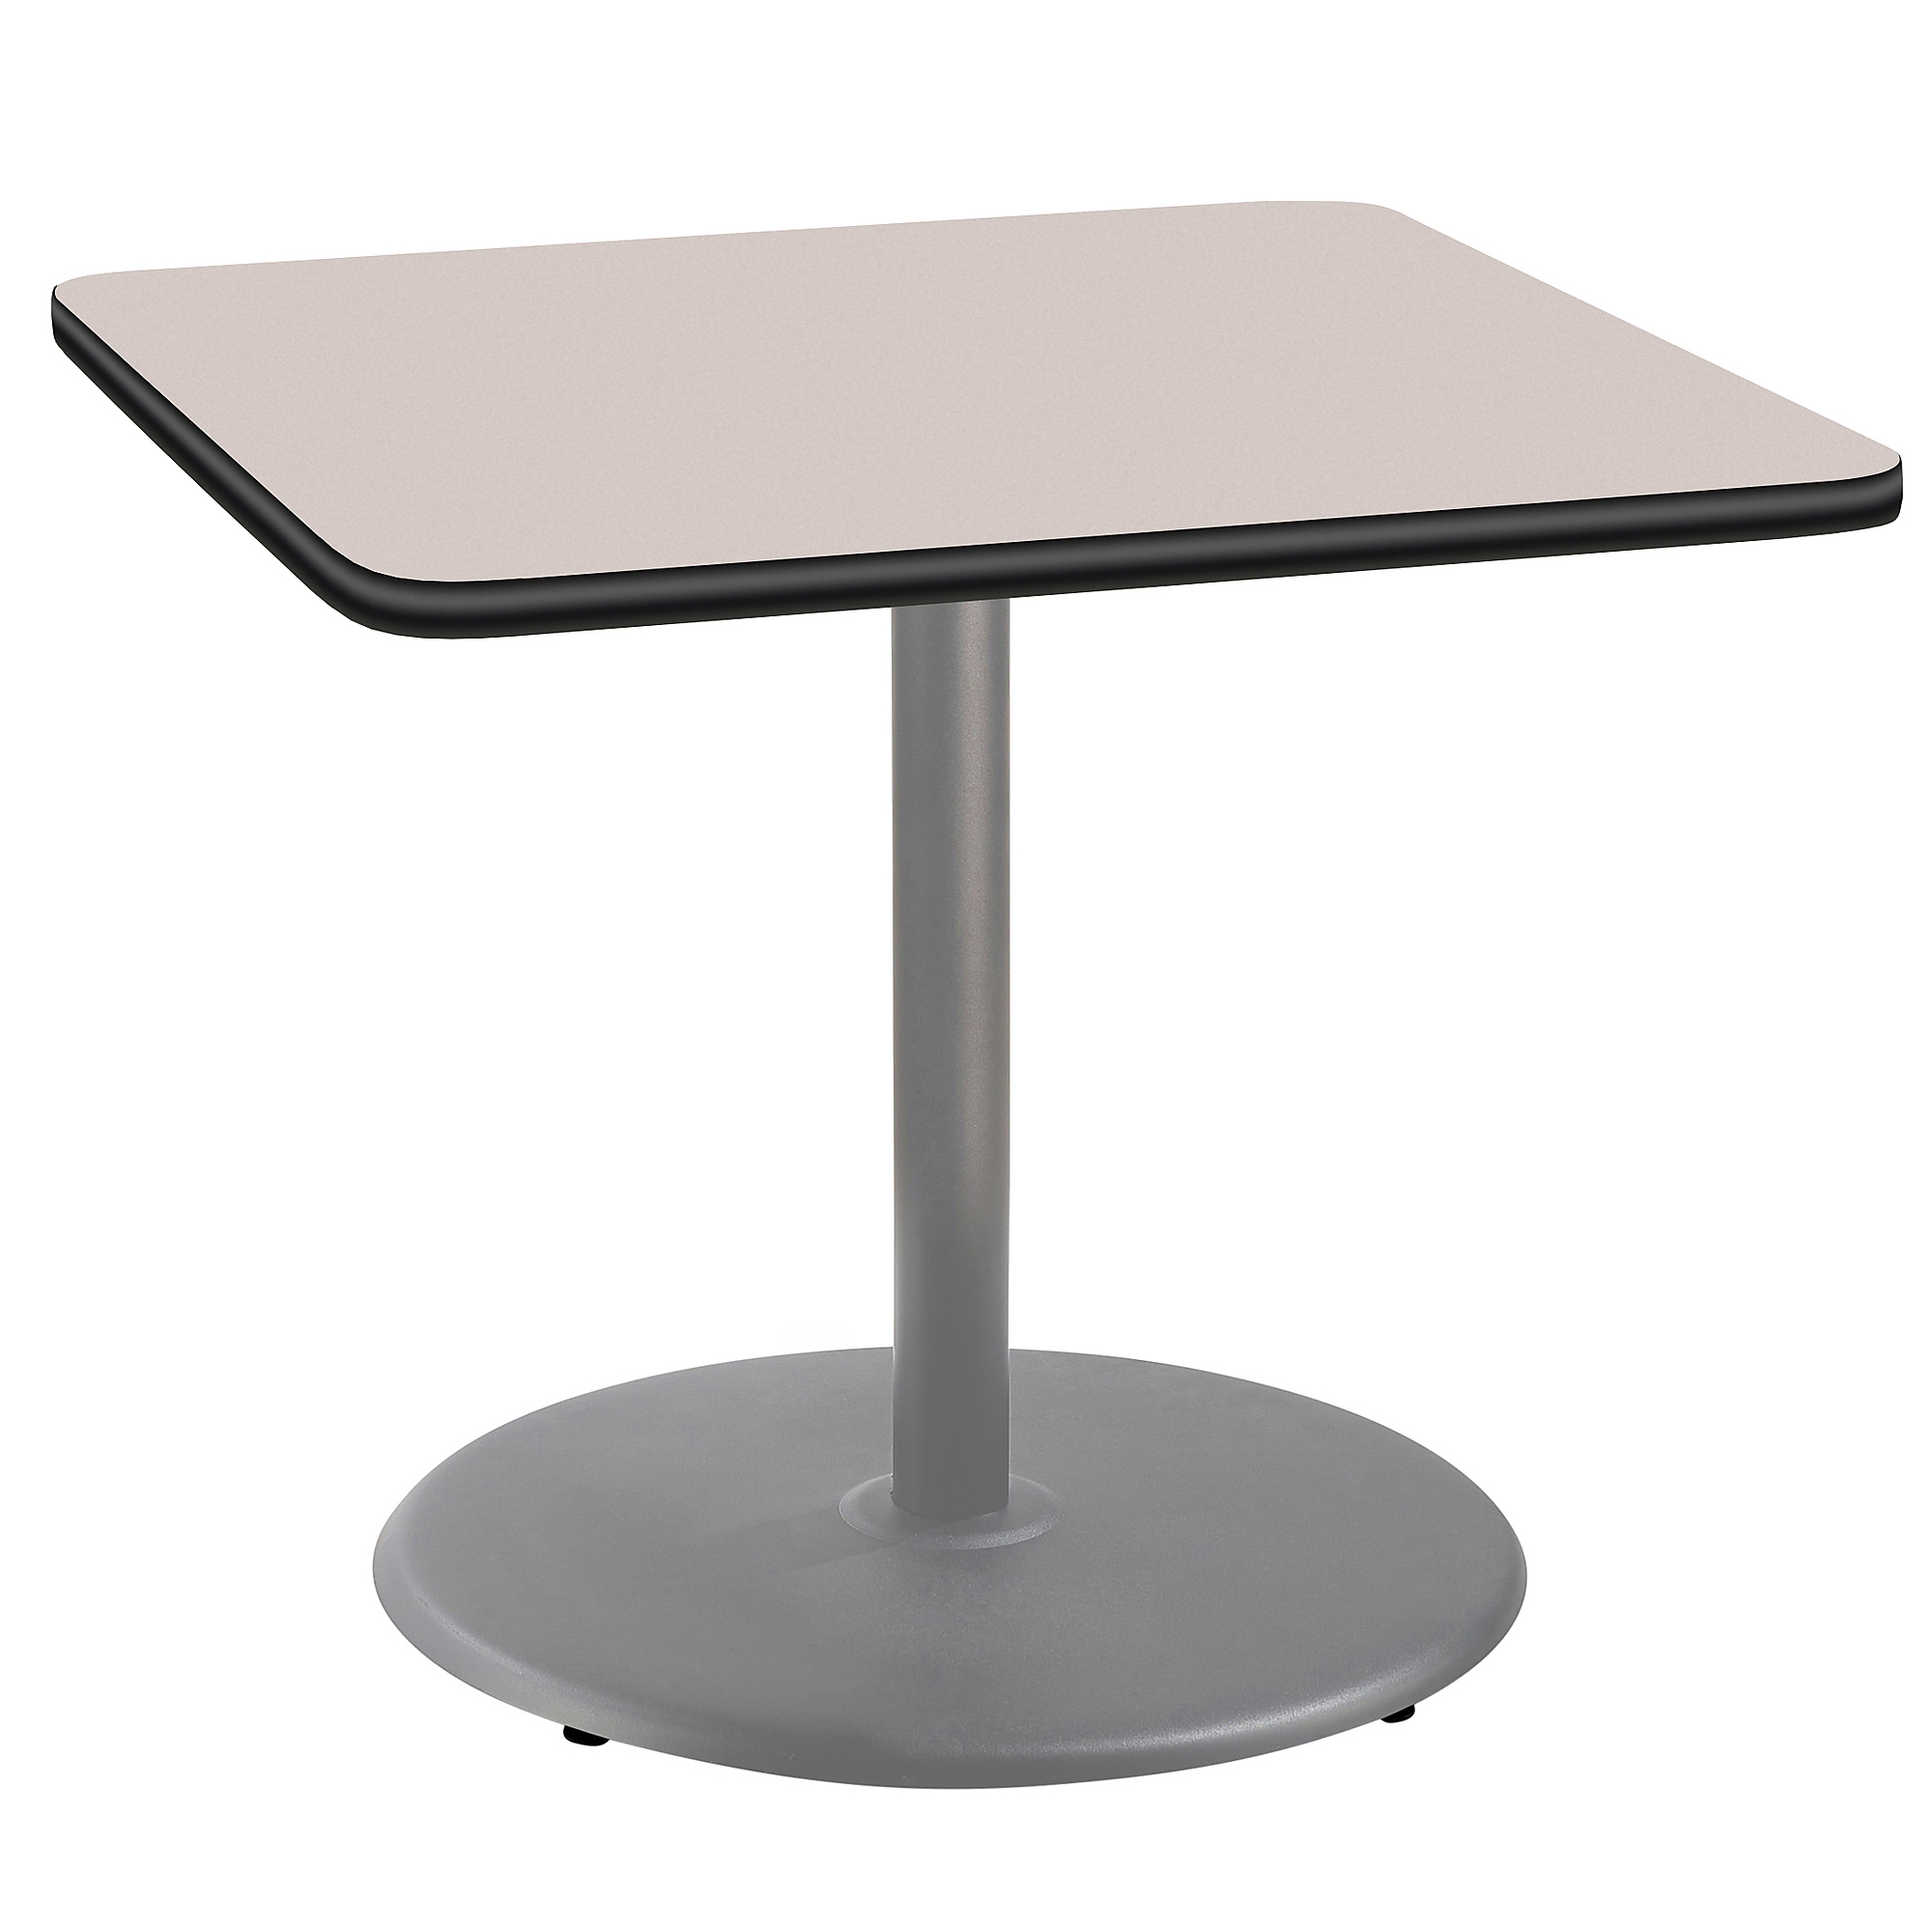 Cafe Table, 36x36x30 Square """"R"""" Base, Height 30 in, Model - National Public Seating CTG33636RDPBTMGY